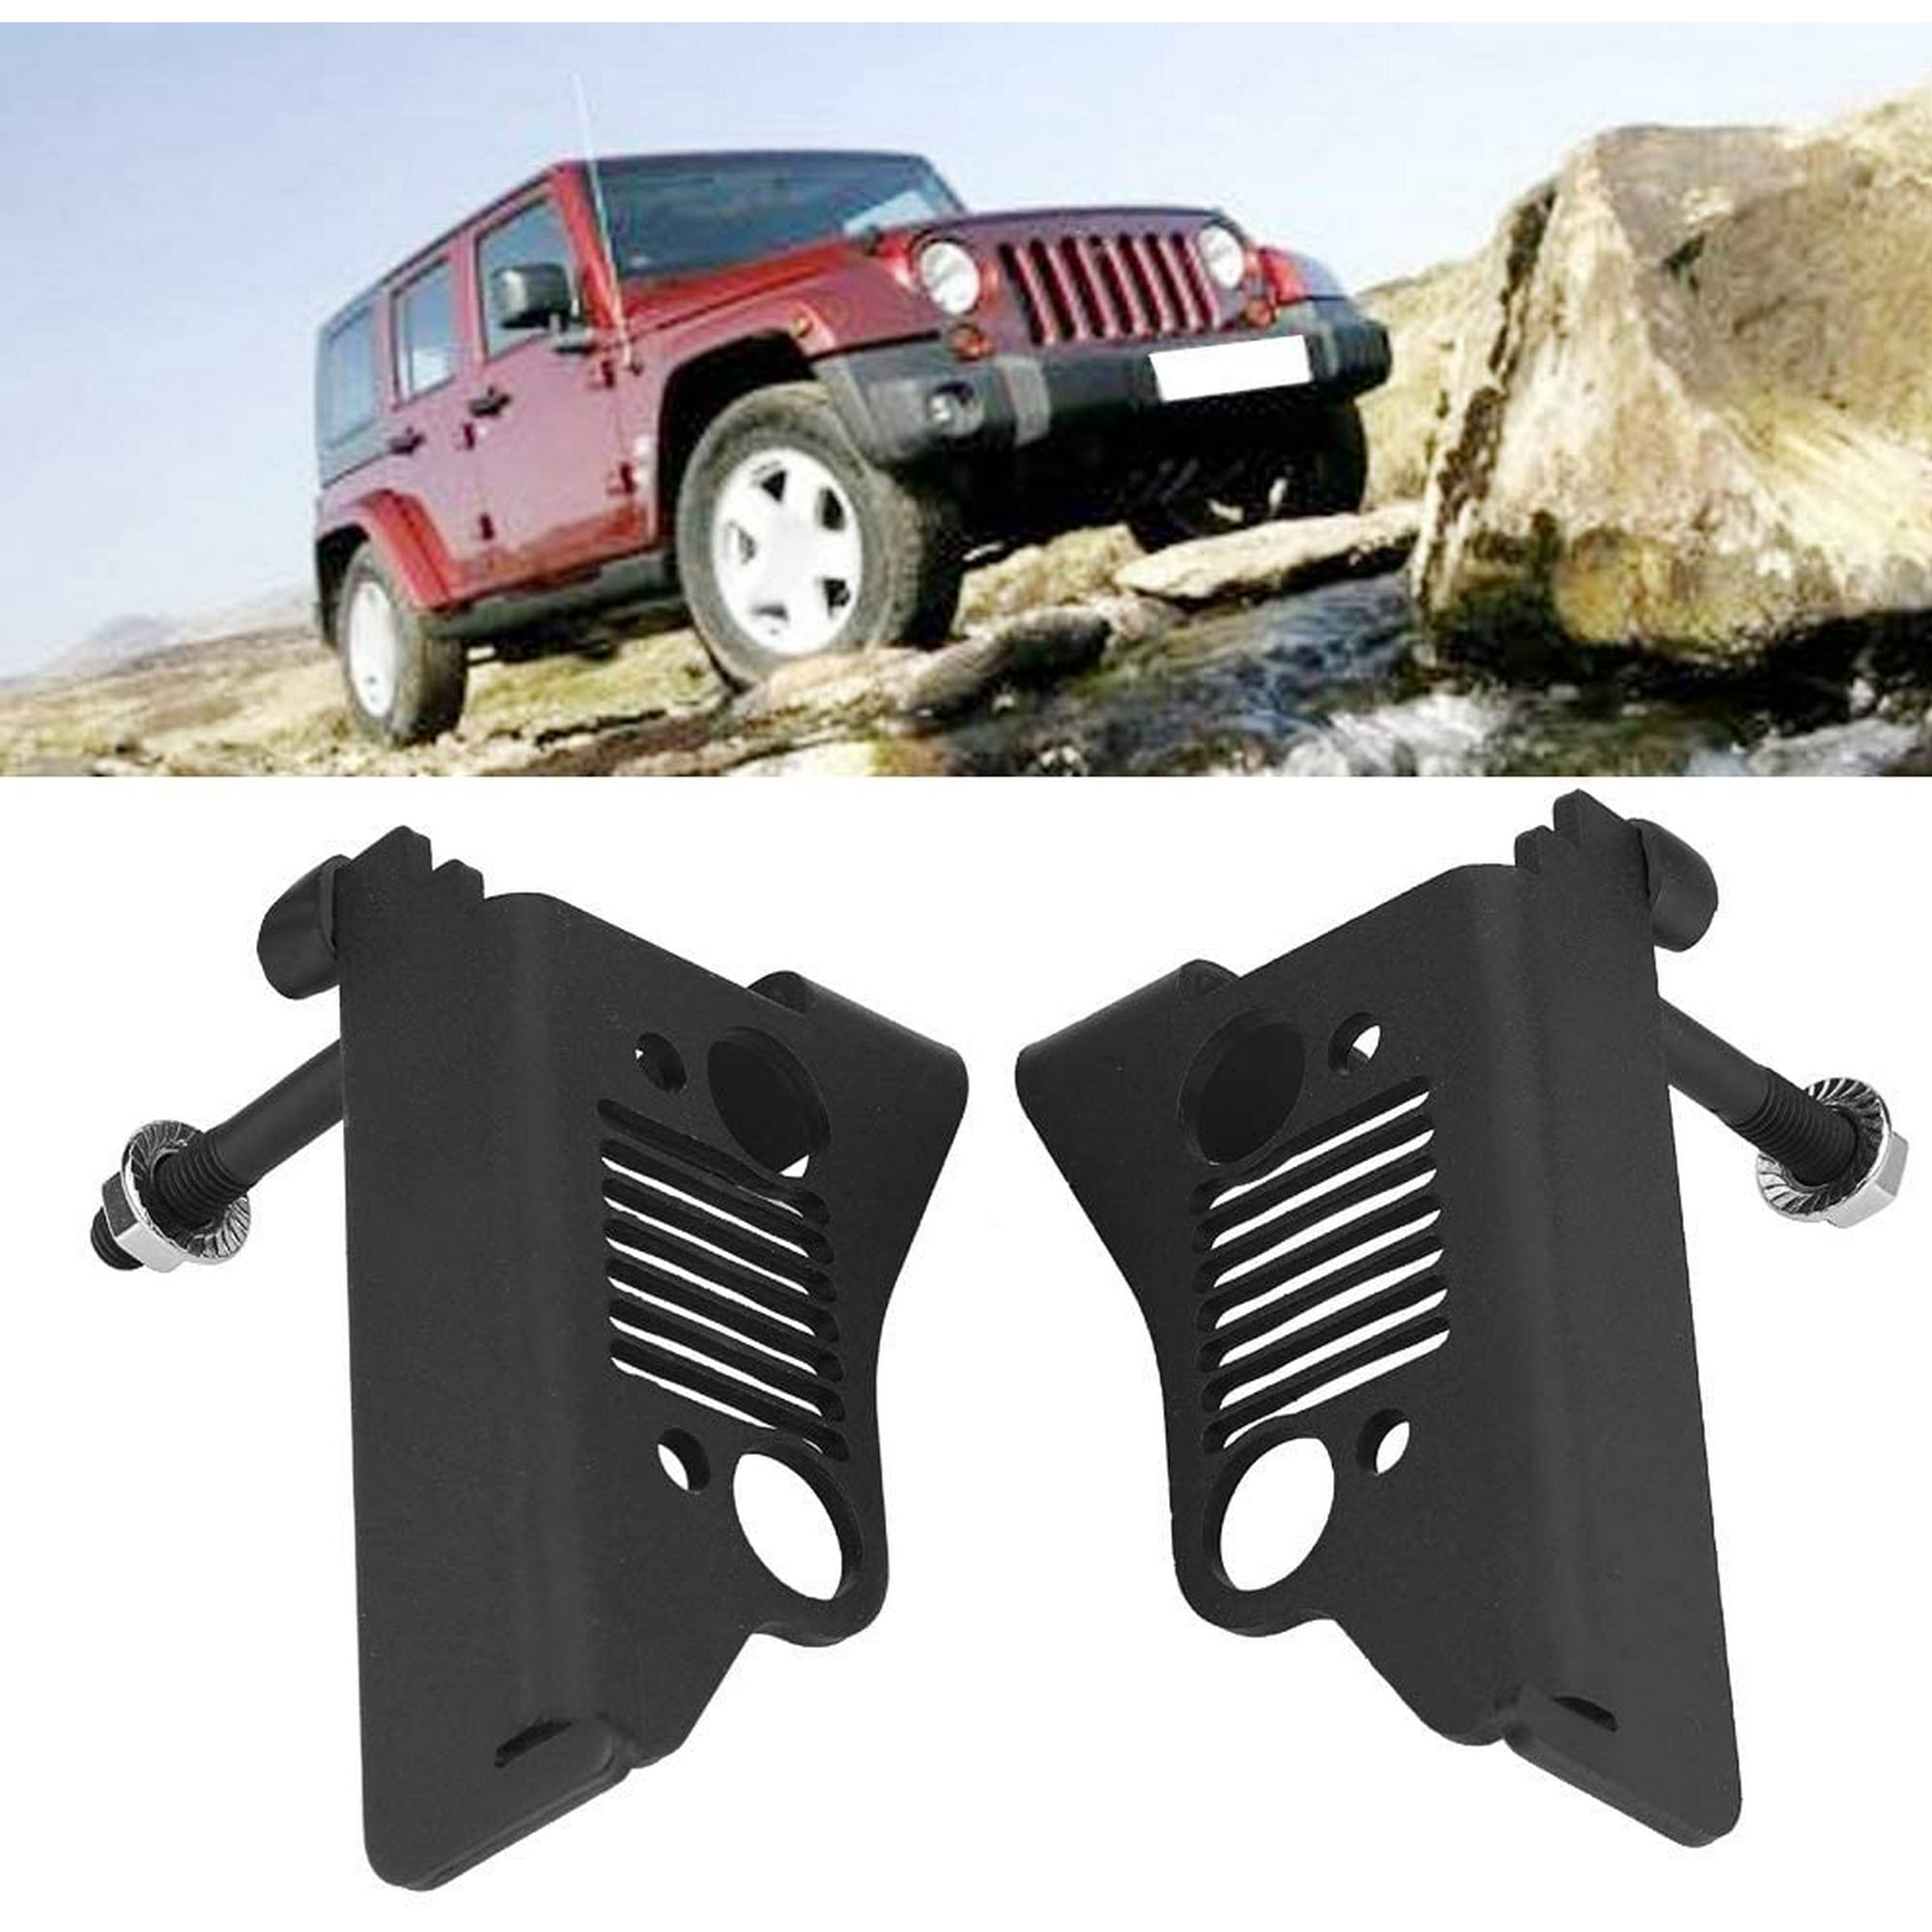 Black Car Foot Pedals, 2-Piece Car Front Treadle Foot Rest Pedal Pad Fit  for Jeep Wrangler Rest Pedal Pad | Walmart Canada